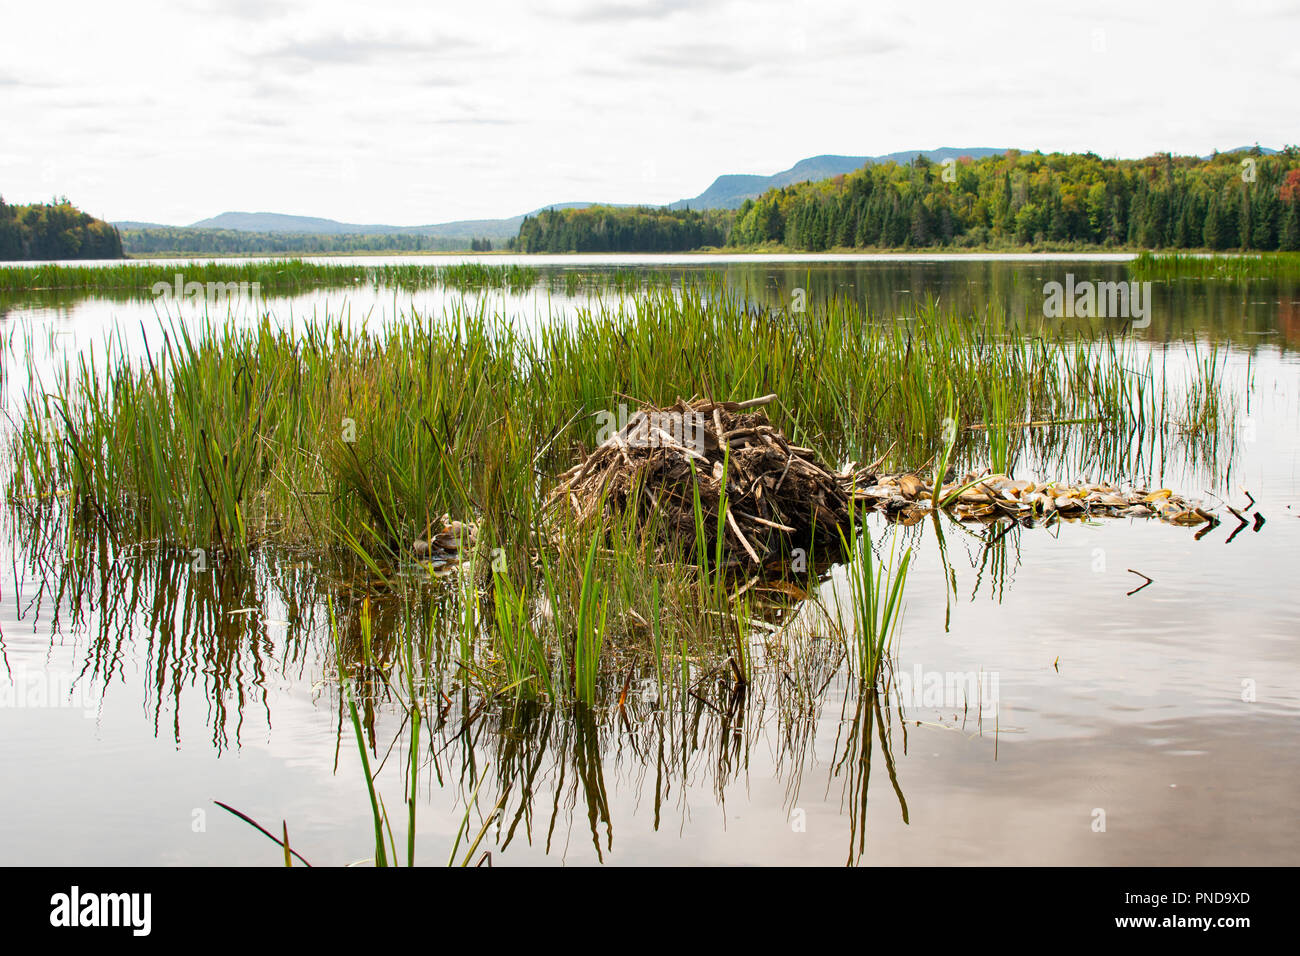 A muskrat lodge or push up with a pile of mussell shells on a lake in the Adirondack Mountains, NY USA Stock Photo